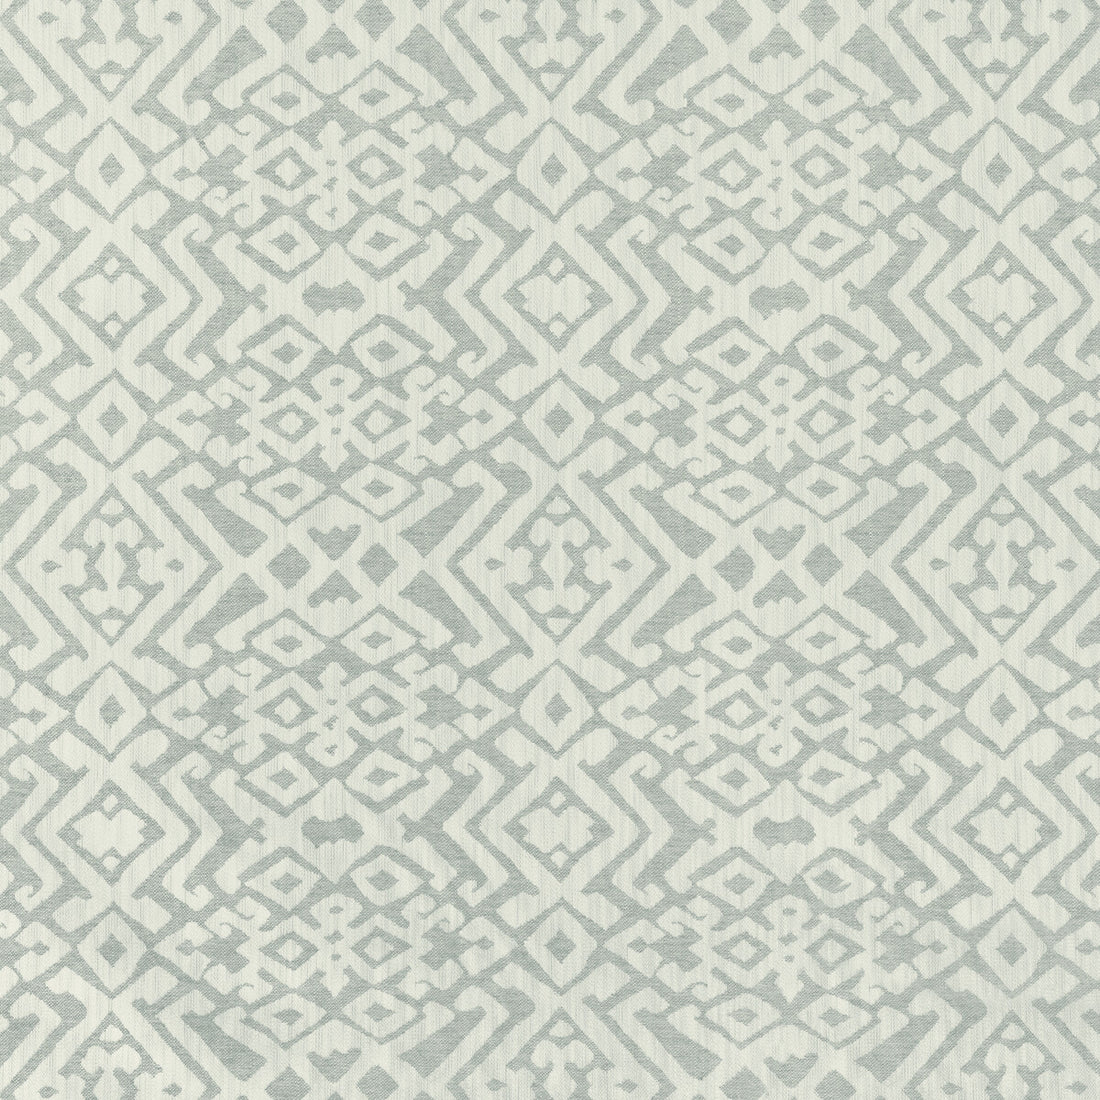 Springbok fabric in mist color - pattern 36874.1121.0 - by Kravet Couture in the Atelier Weaves collection